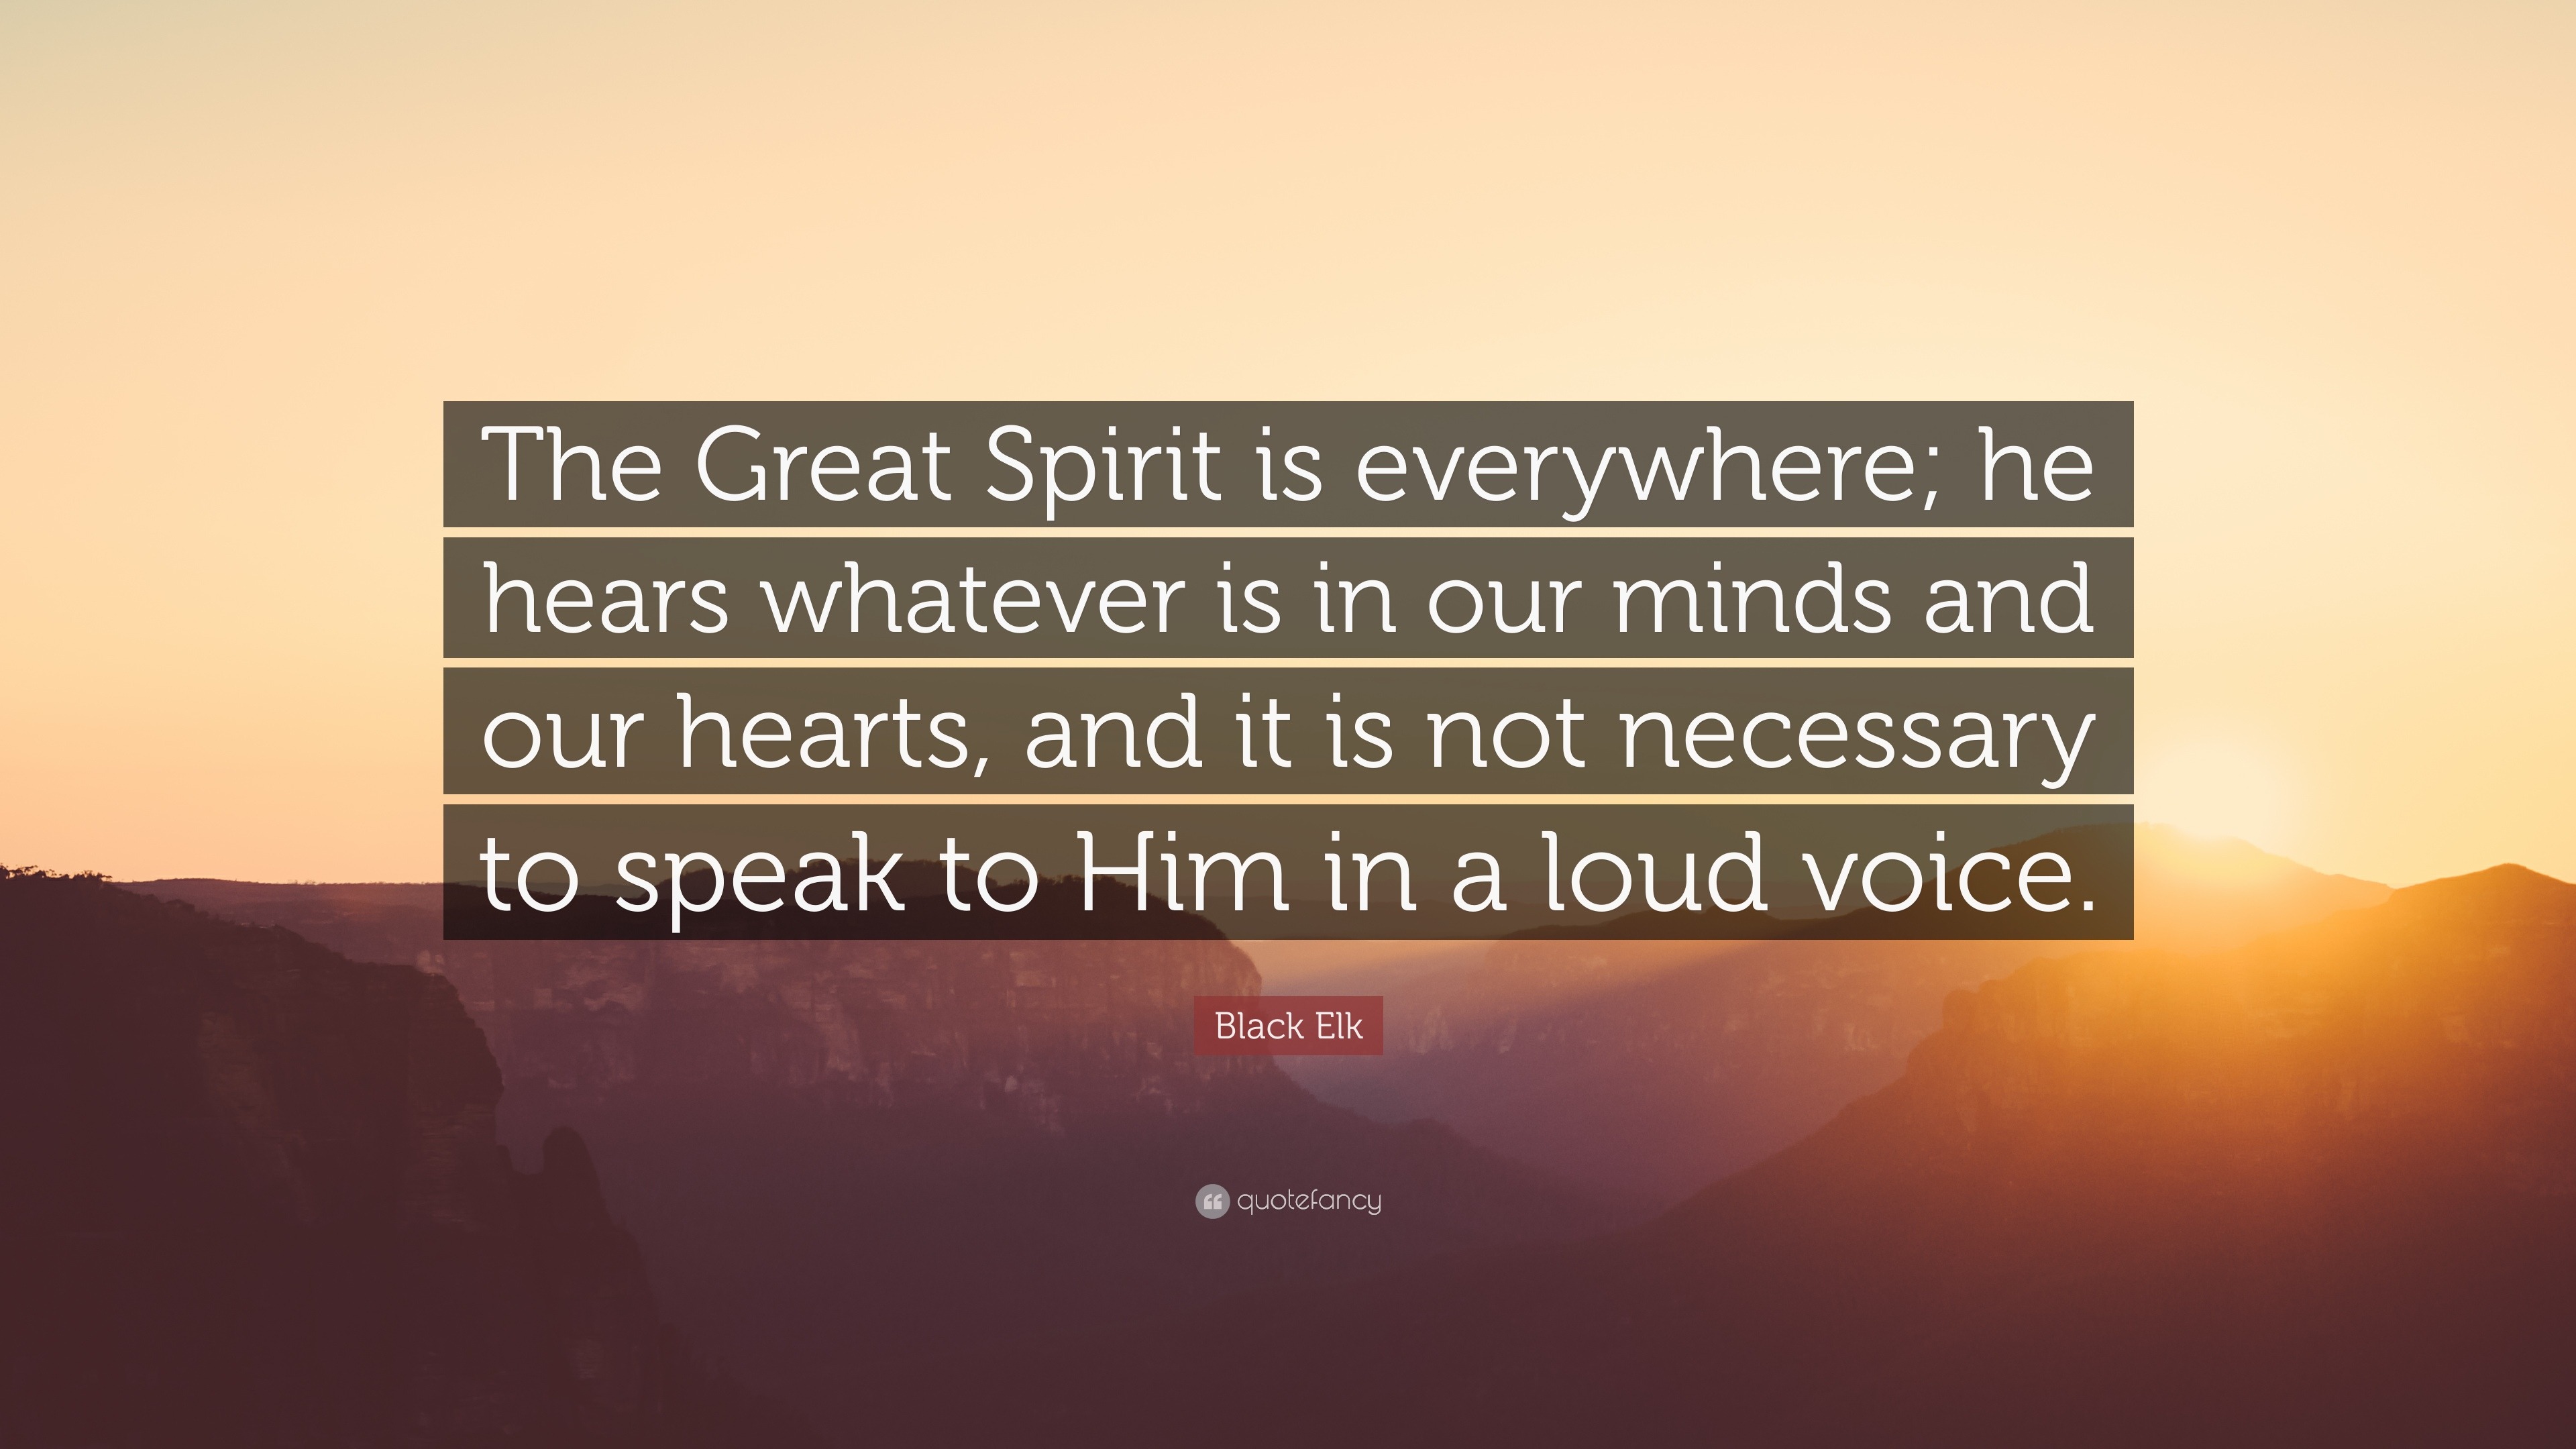 Black Elk Quote: “The Great Spirit is everywhere; he hears whatever is ...